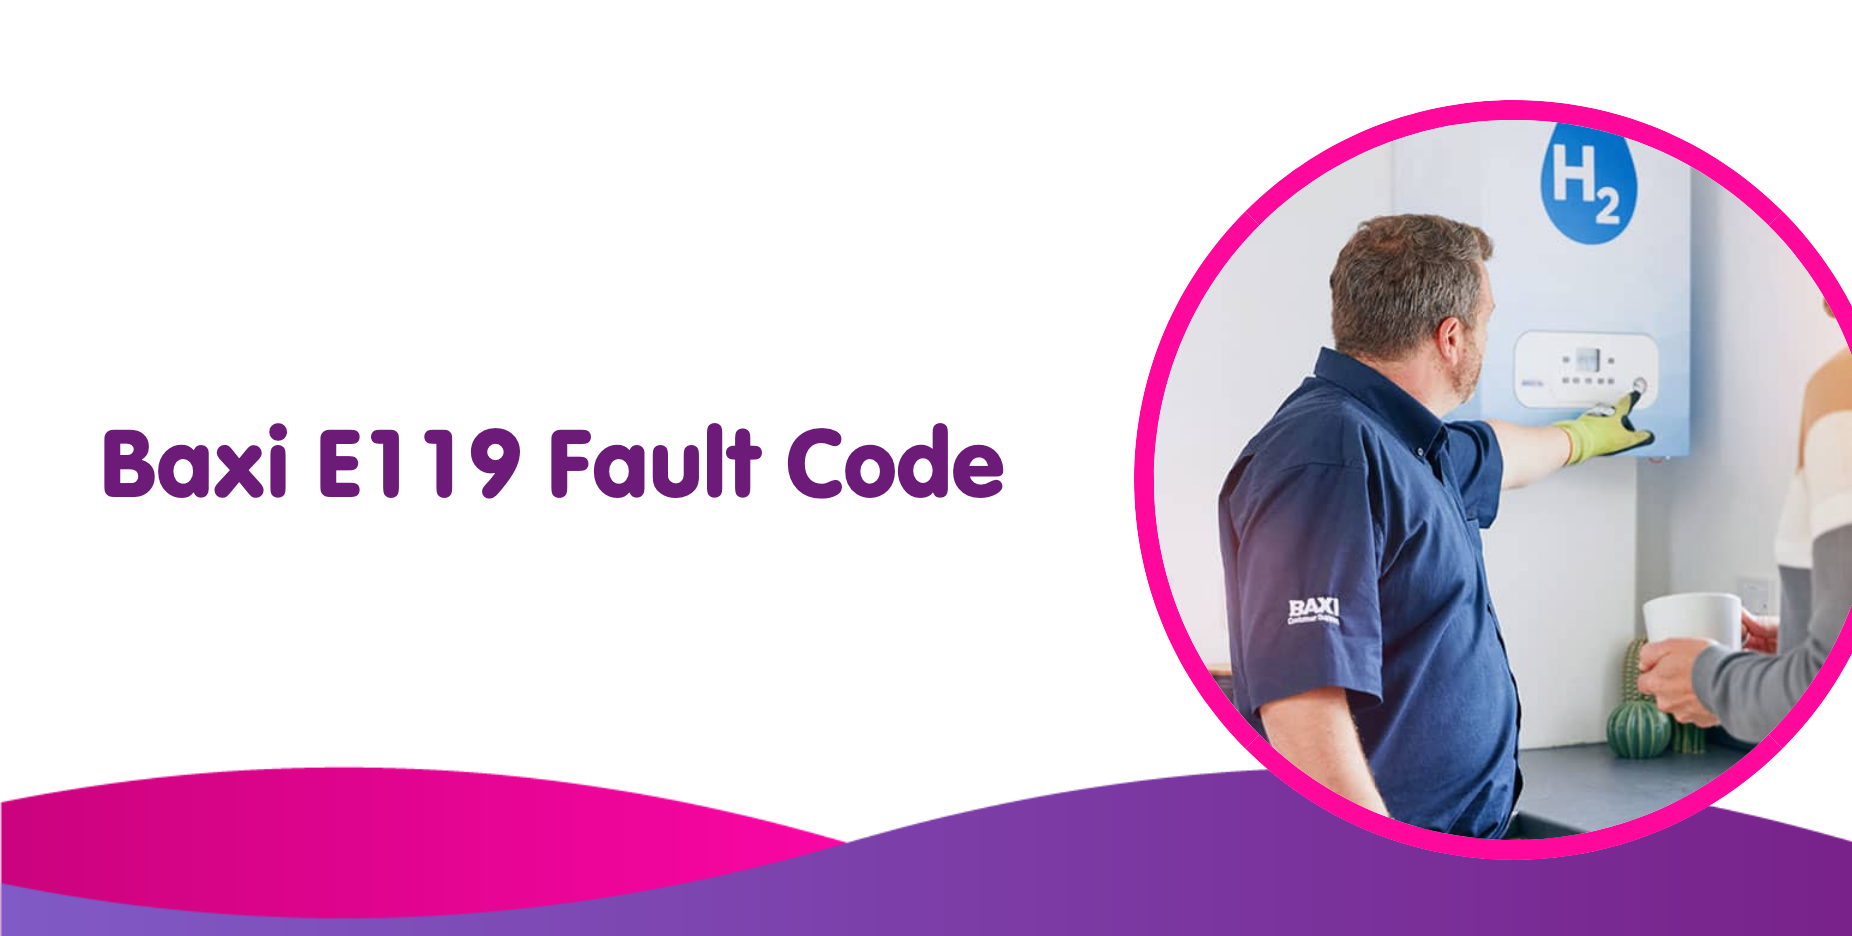 Baxi E119 Fault Code Meaning, Causes & How To Fix